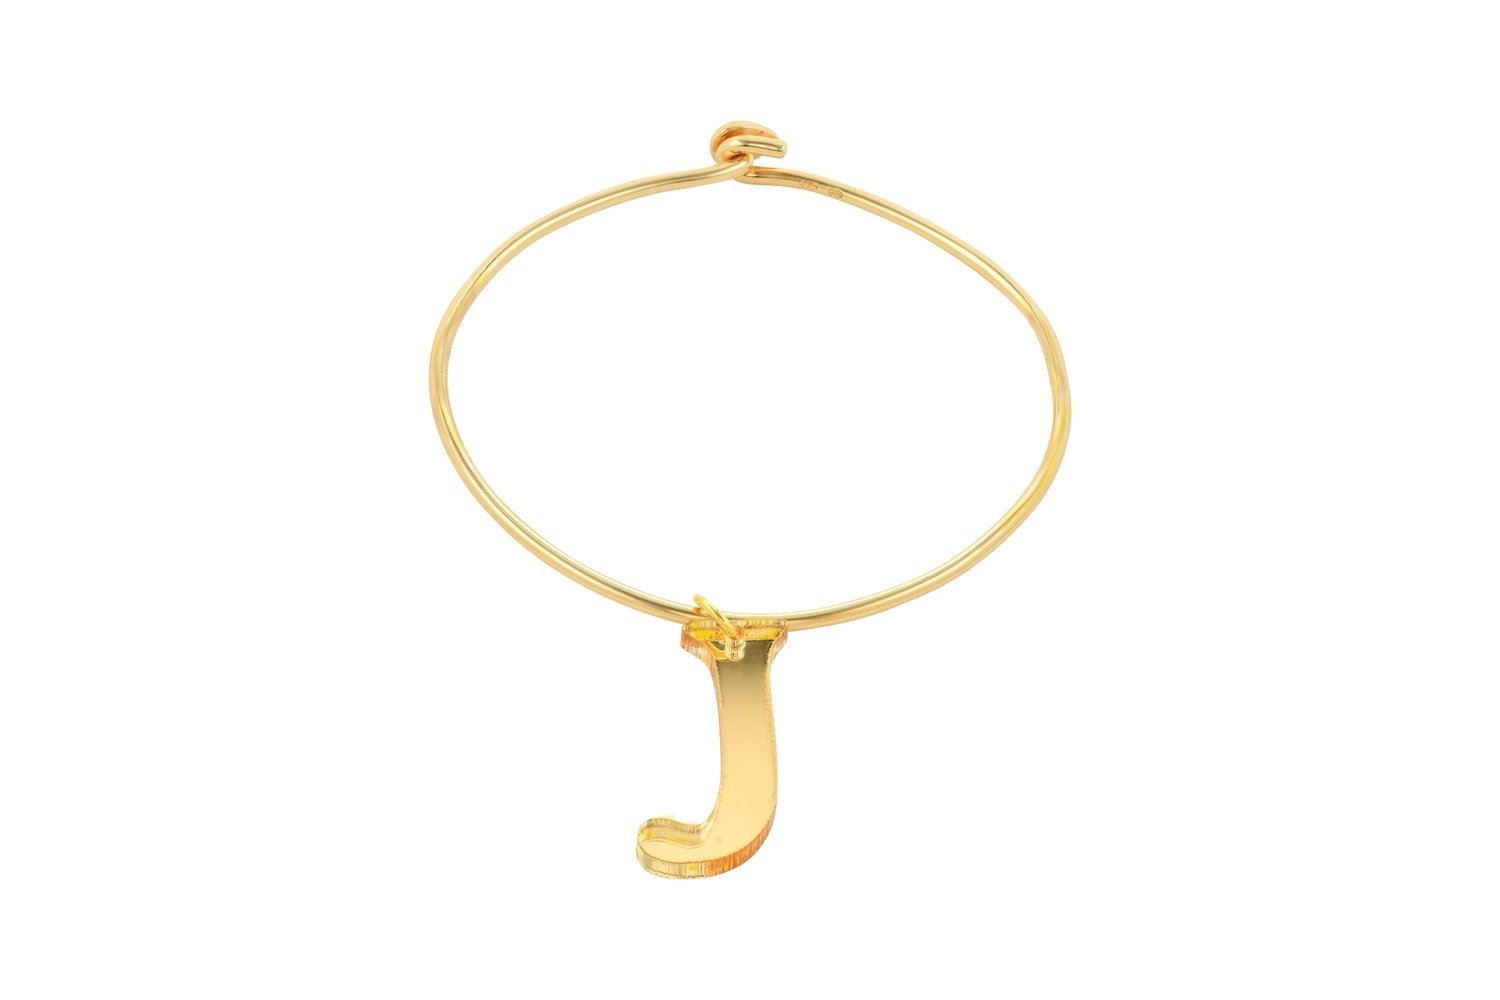 Sculpted Alphabet Charm with Sterling Silver Bangle Bracelet with Yellow Gold Plating